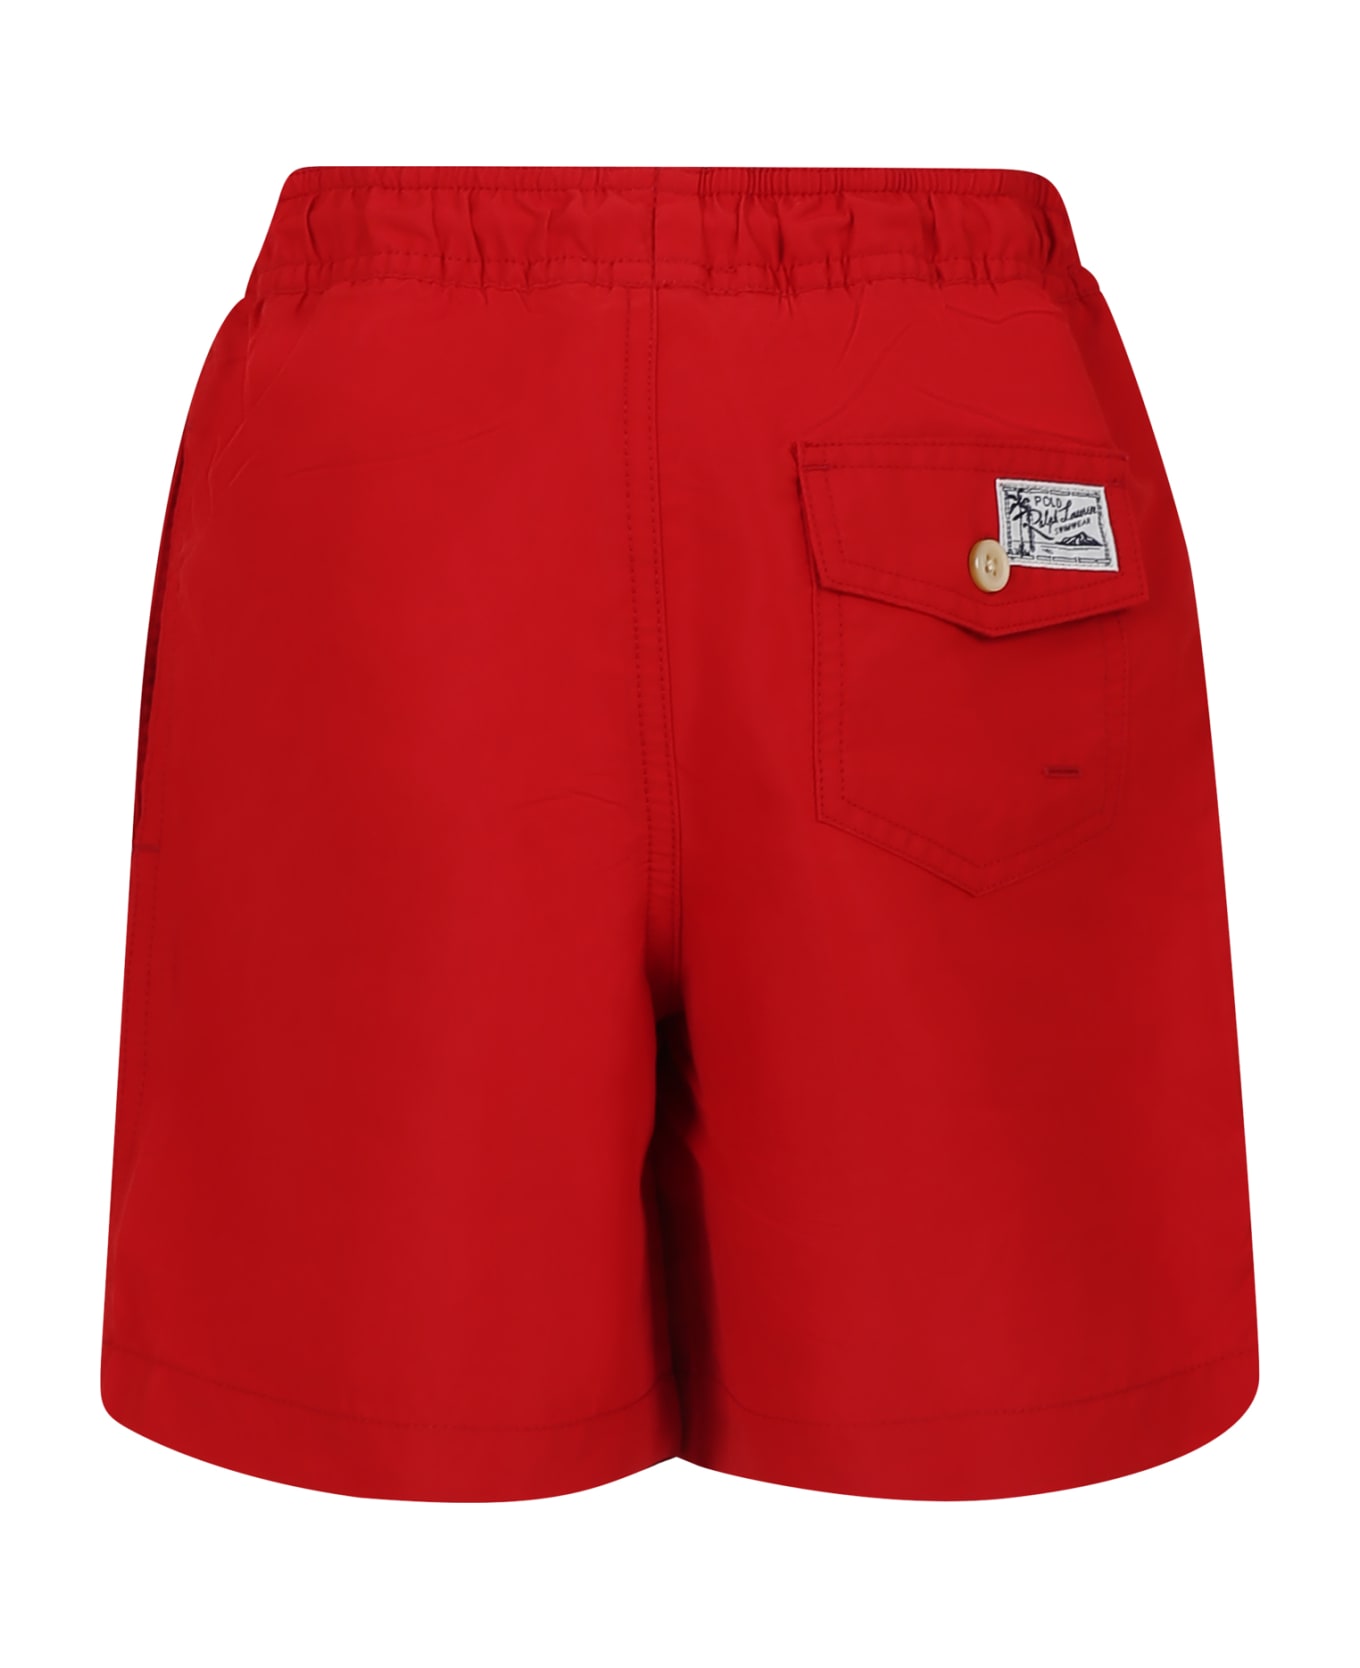 Ralph Lauren Red Swimsuit For Boy With Horse - Red 水着